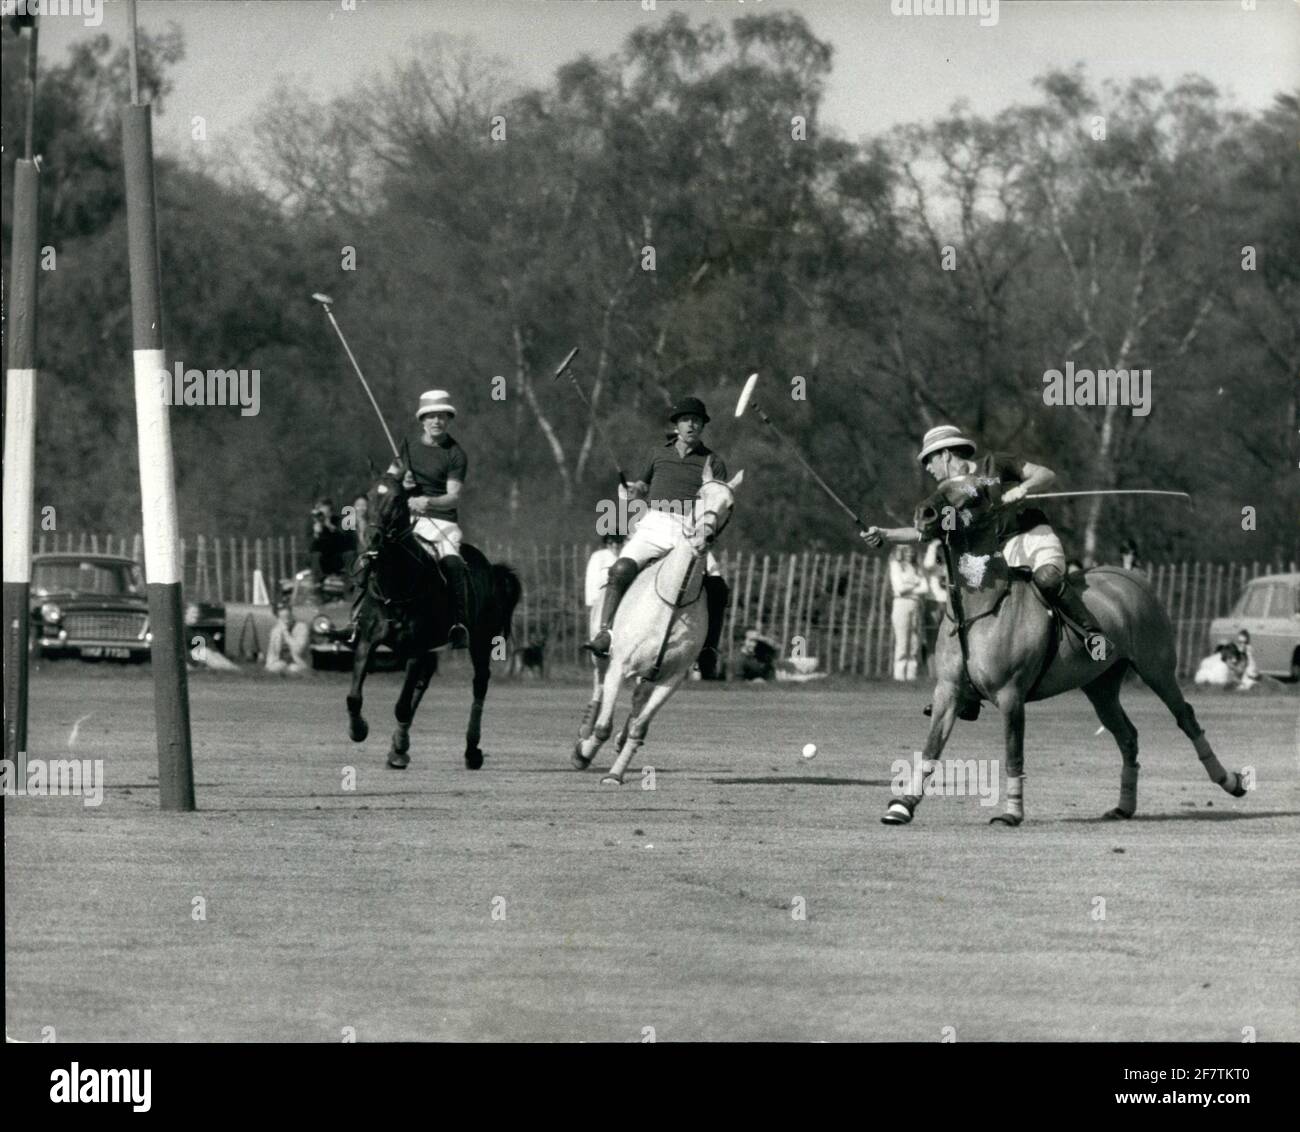 ALL IN THE FAMILY: May 3, 1971, Henley-on-Thames, Oxfordshire, England: Royal father and son are polo rivals. A scoring shot from CHARLES, Prince of Wales who scored four goals for Friar Park at Windsor yesterday, against Windsor Park, whose team included his father, PRINCE PHILIP, and PRINCE WILLIAM of Gloucester. Friar Park won 8-3¾. Credit: Keystone Press Agency/ZUMA Wire/Alamy Live News Stock Photo